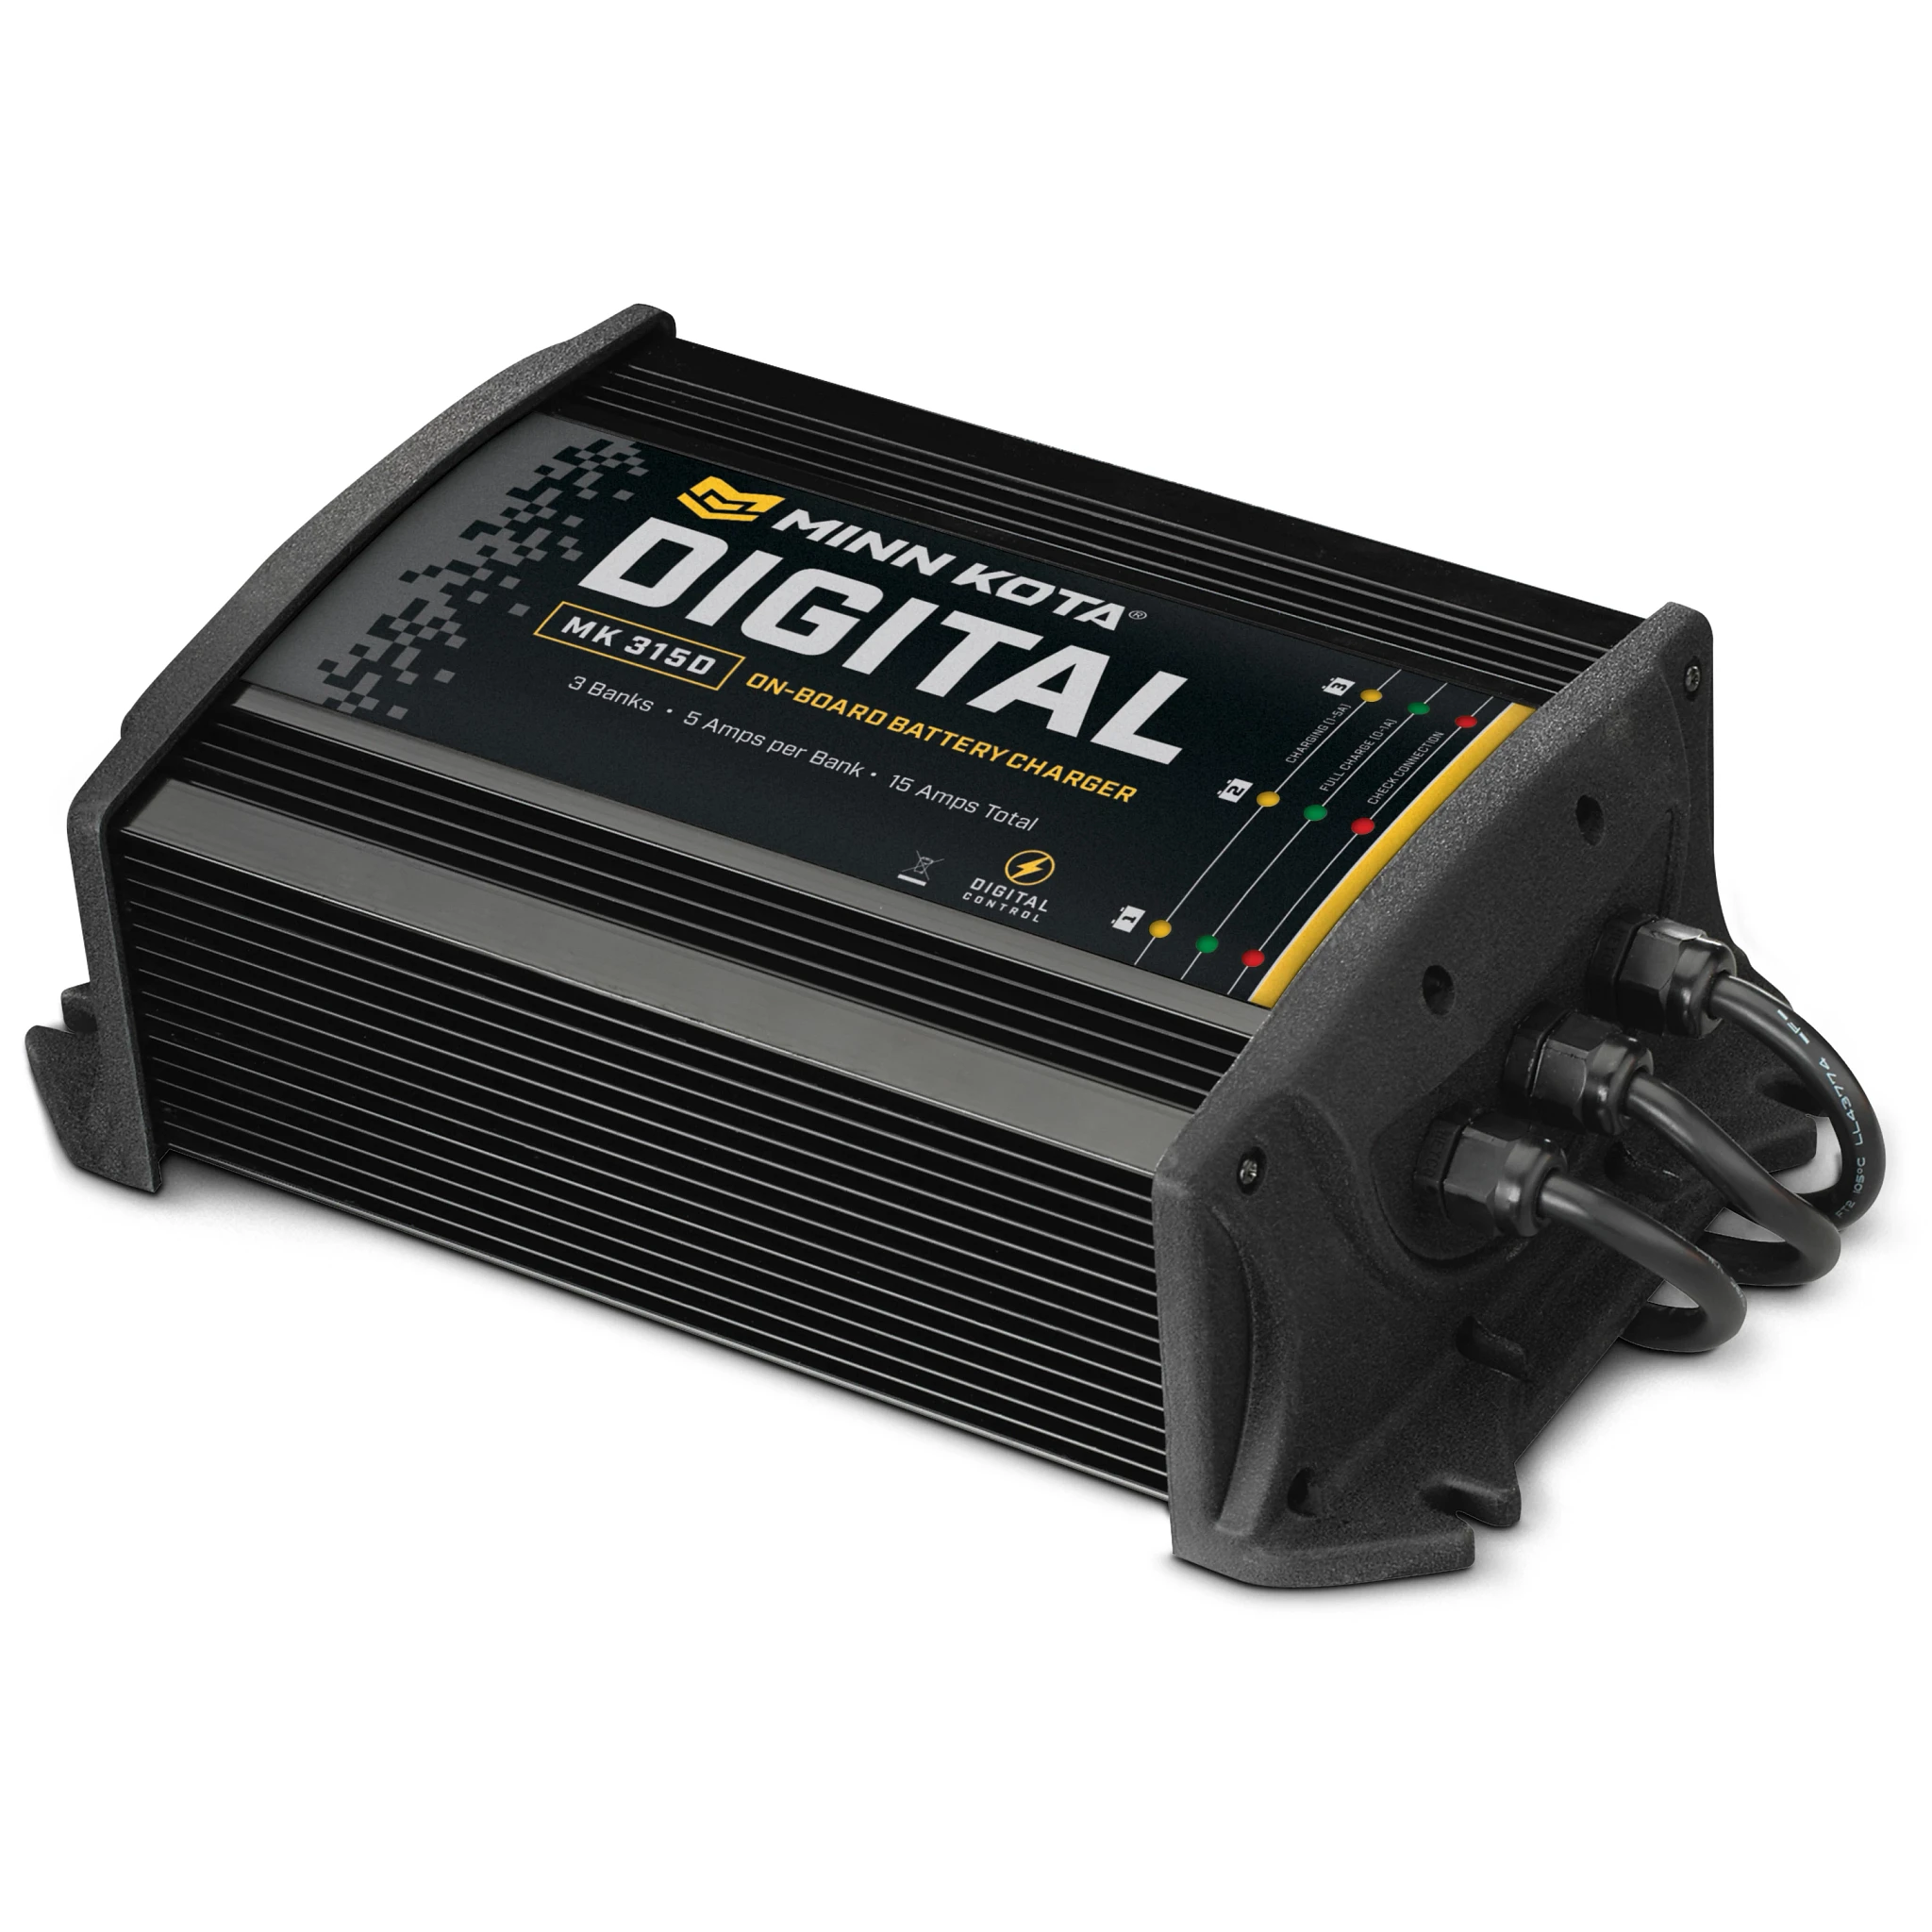 Digital On-Board Battery Charger 3 bank x 5 amps